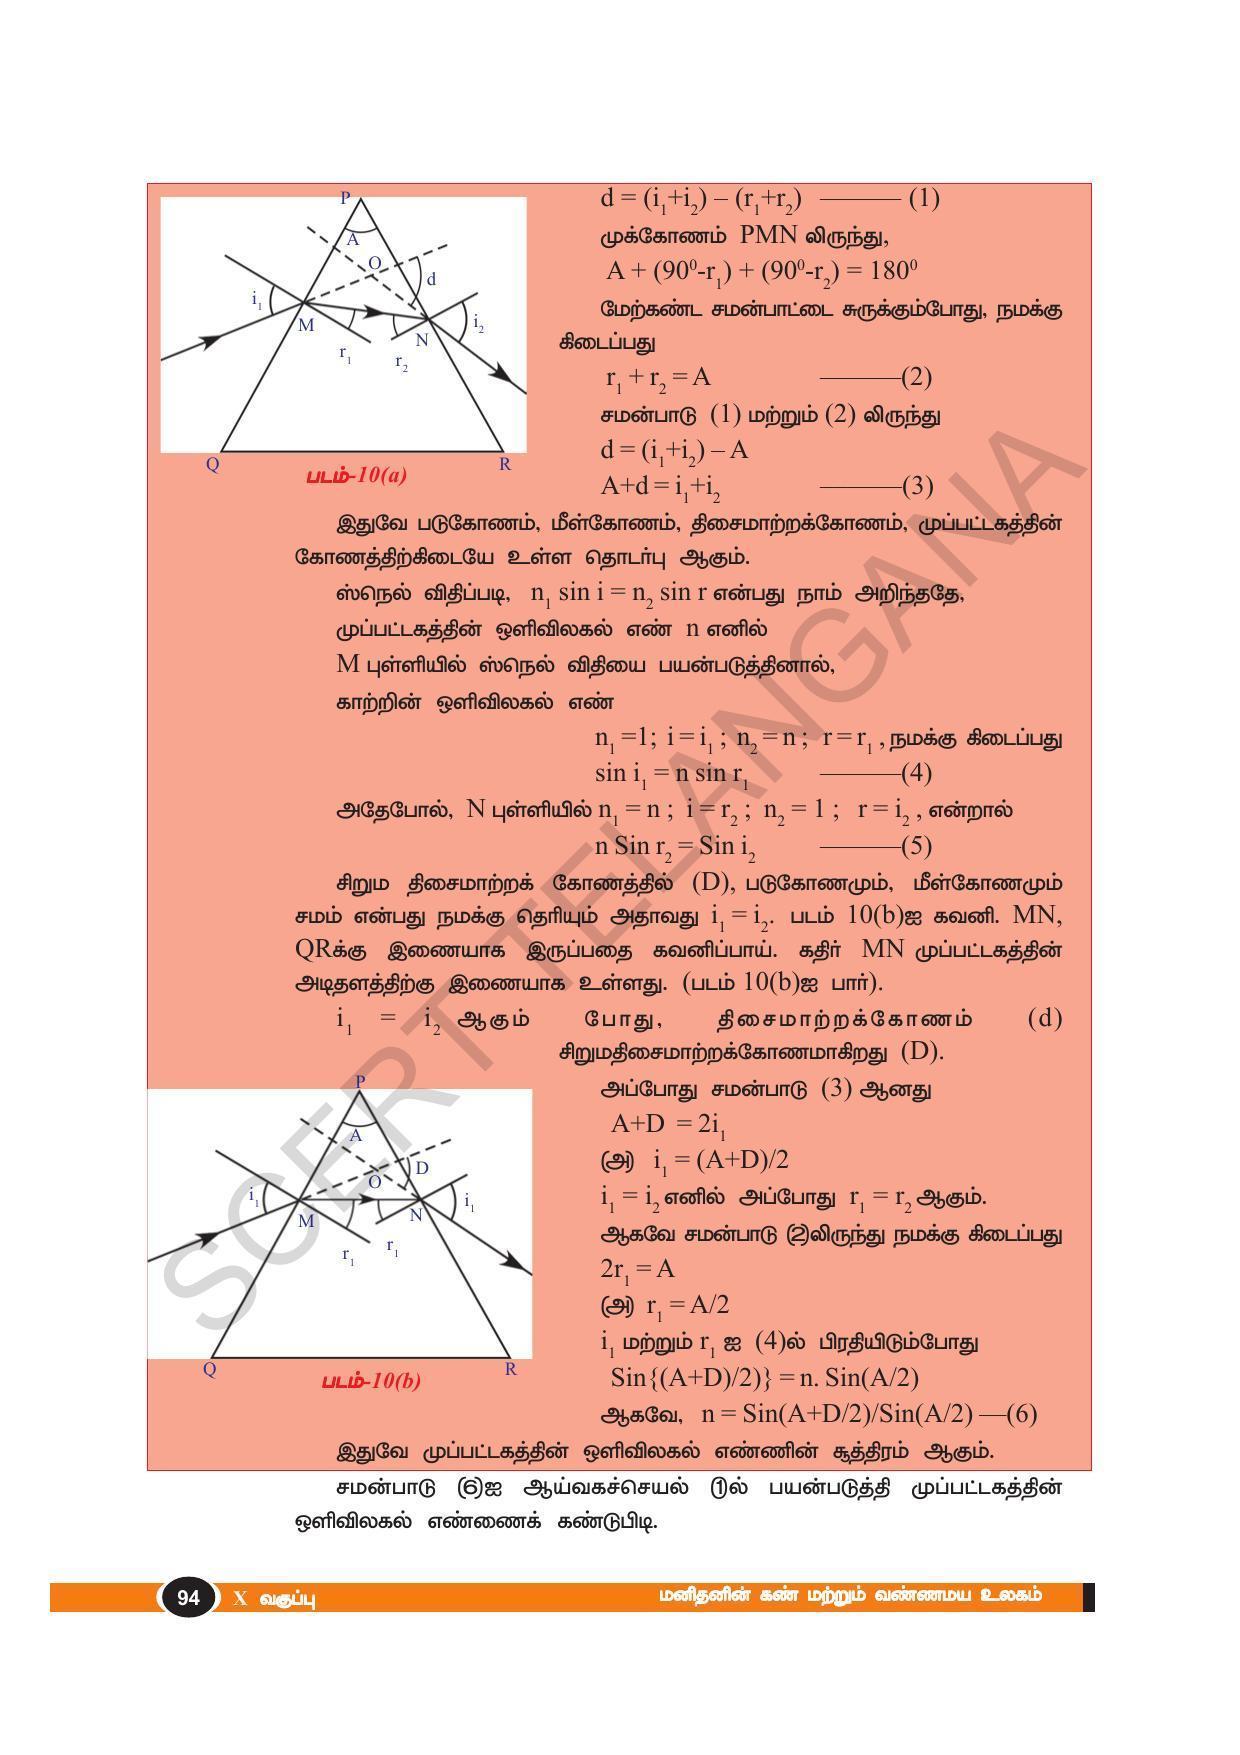 TS SCERT Class 10 Physical Science(Tamil Medium) Text Book - Page 106